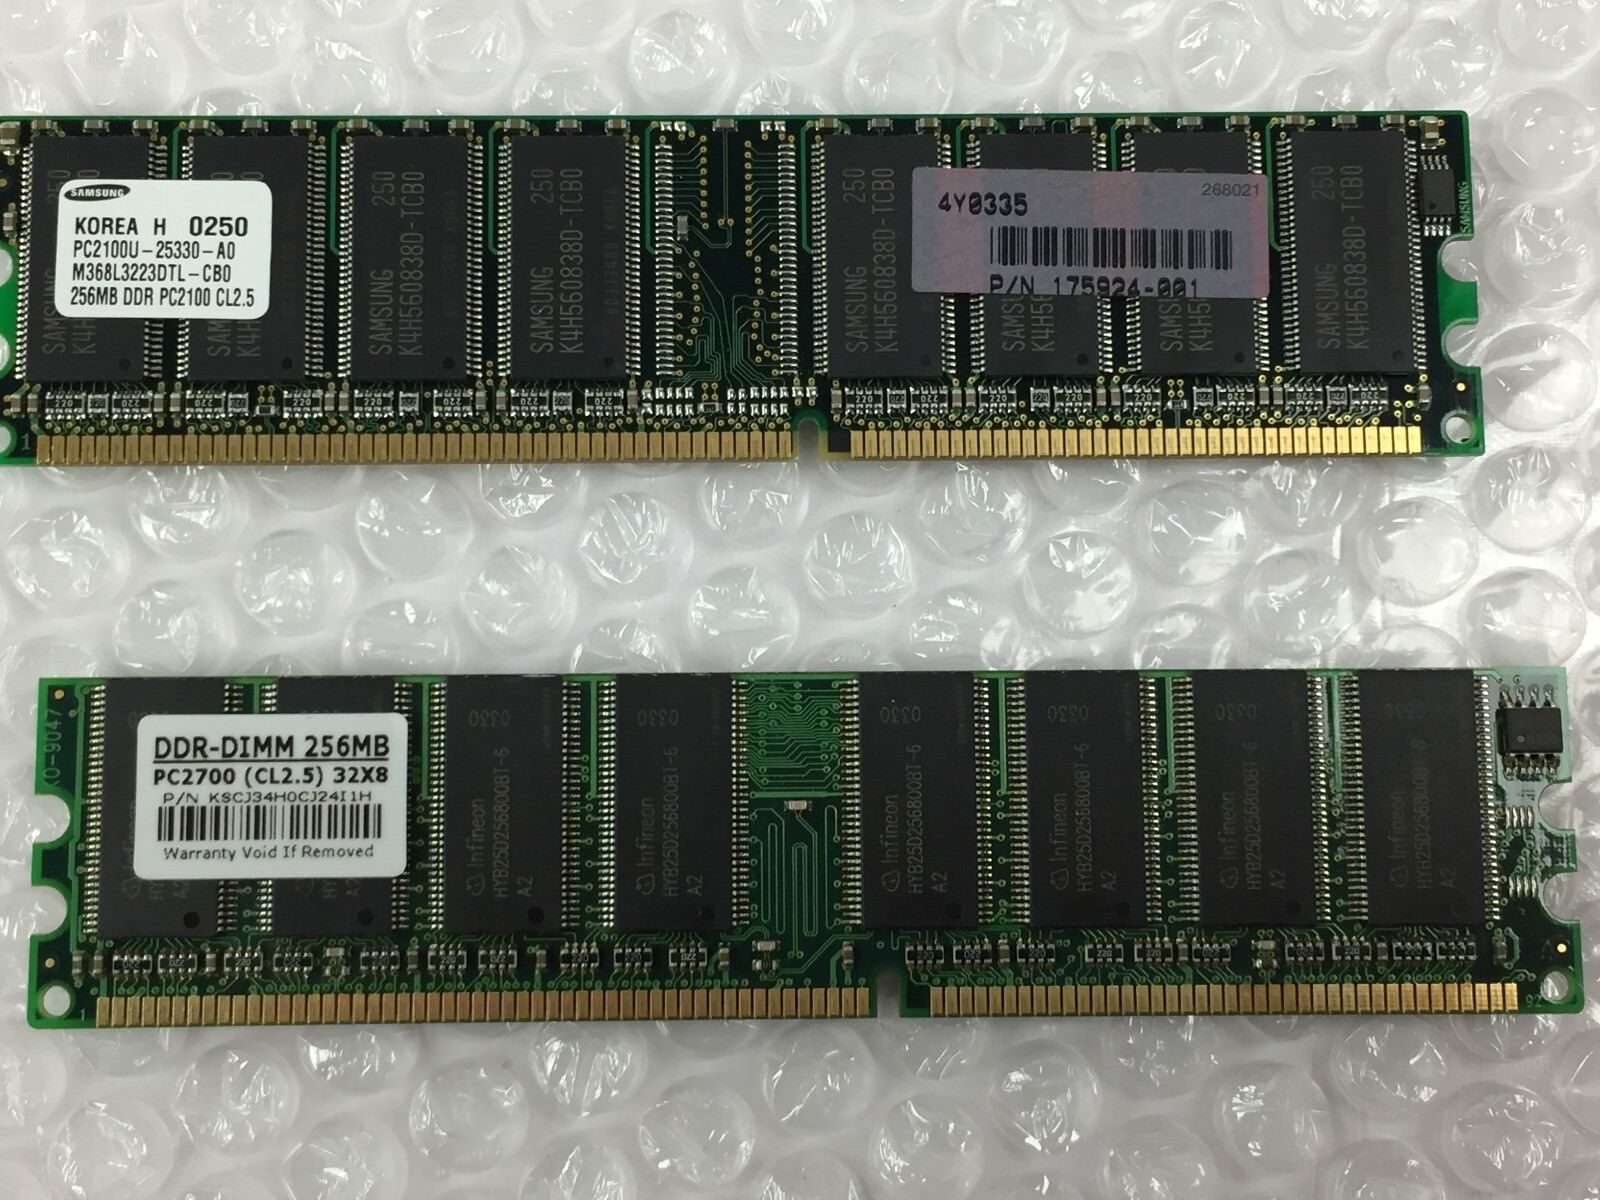 2 Sticks of 256MB DDR-PC2100 and PC2700 CL2.5, M368L3223DTL